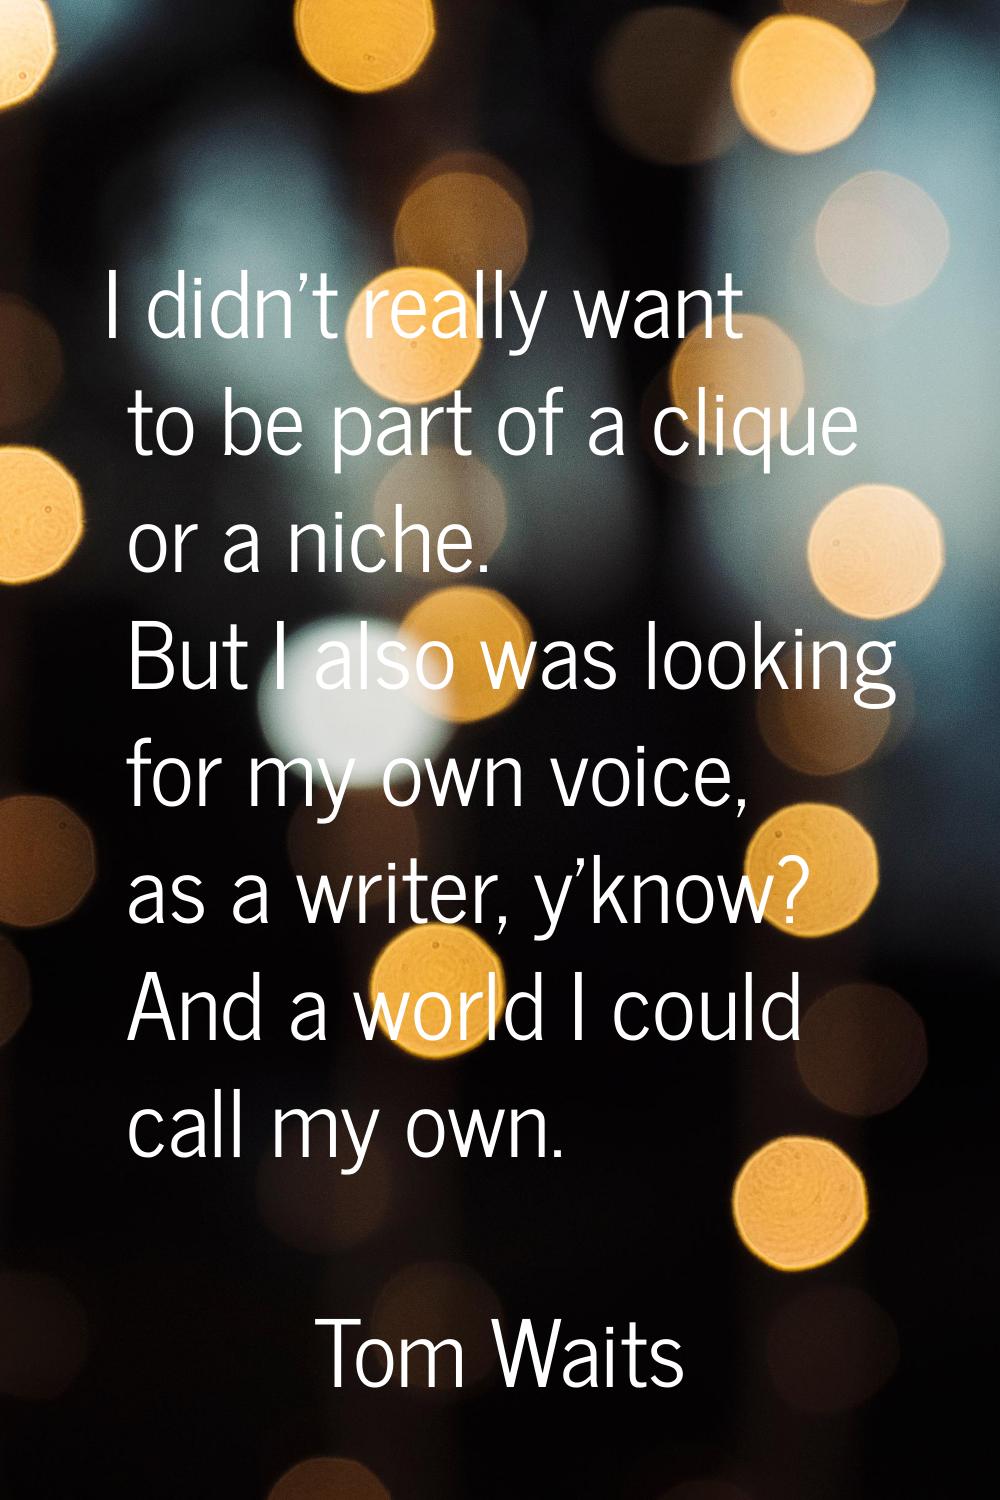 I didn't really want to be part of a clique or a niche. But I also was looking for my own voice, as